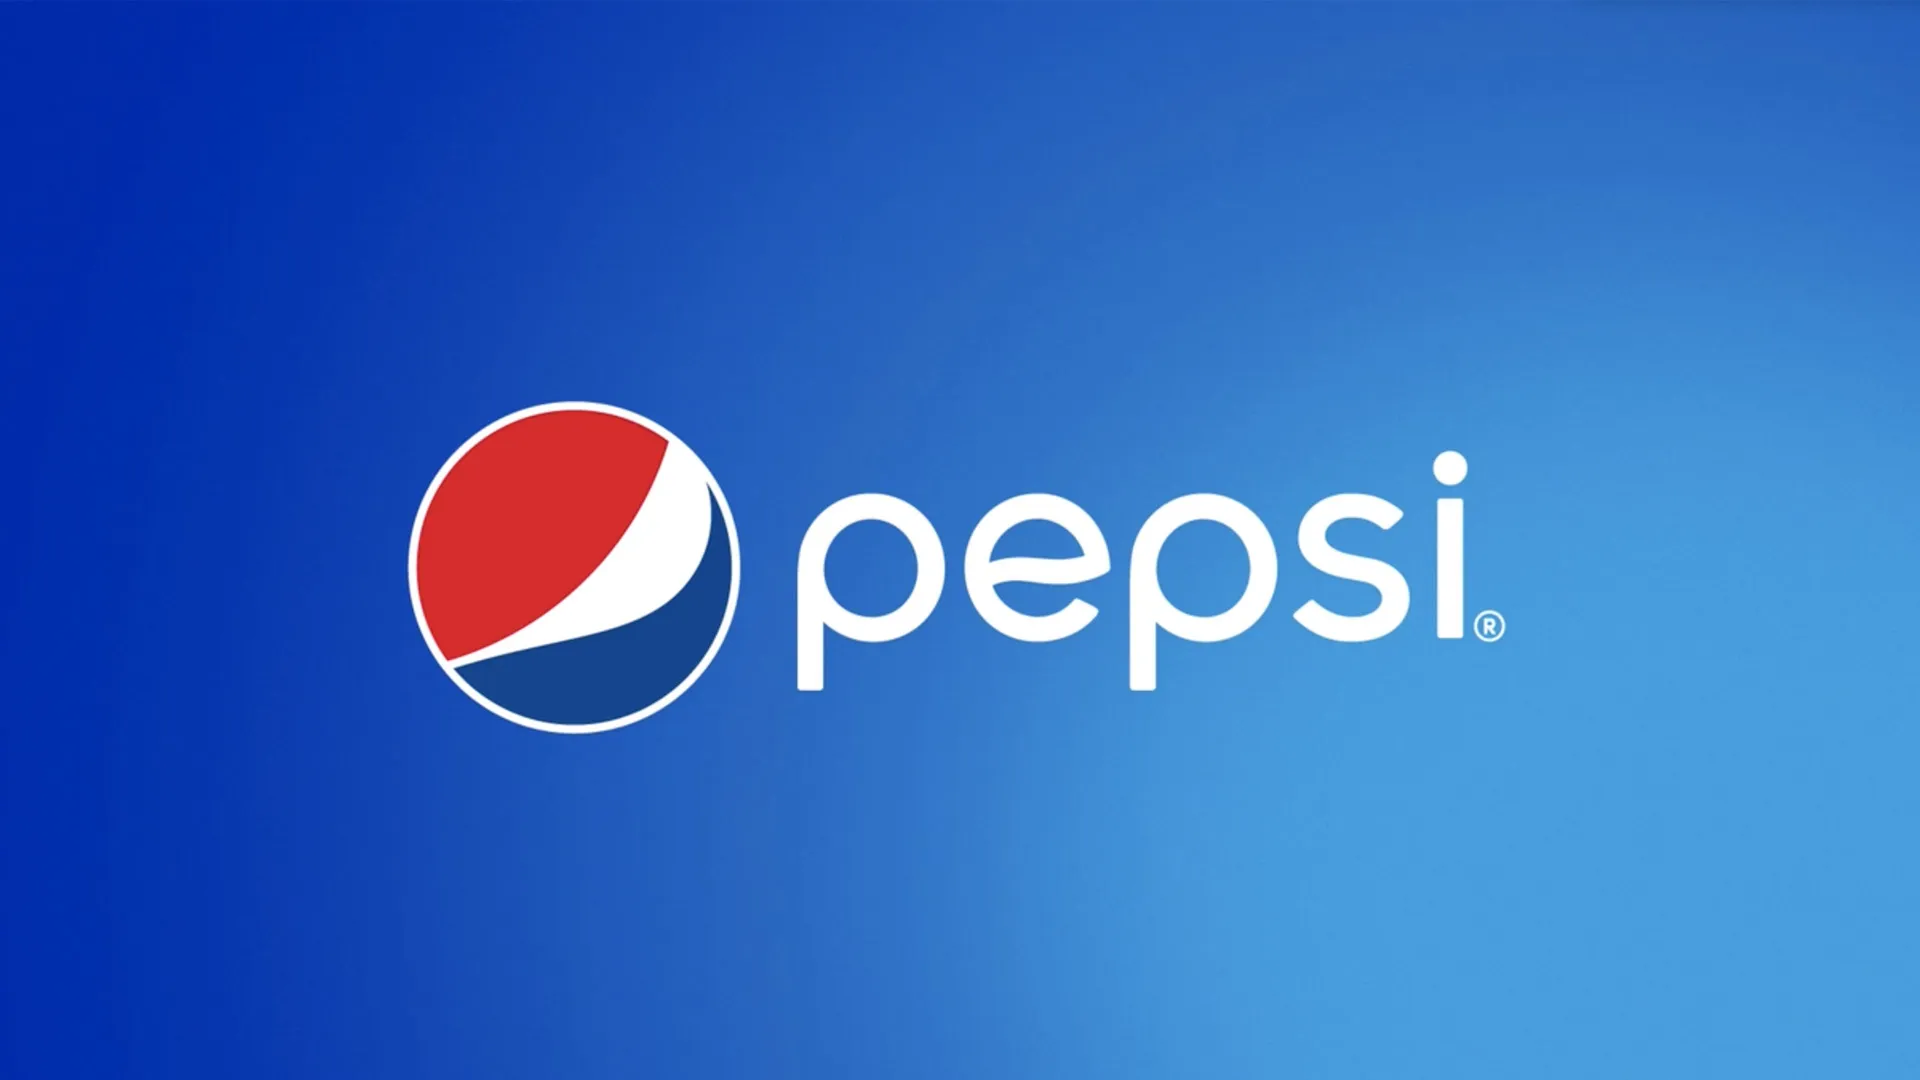 PEPSI THROUGH THE AGES – AR EXPERIENCE